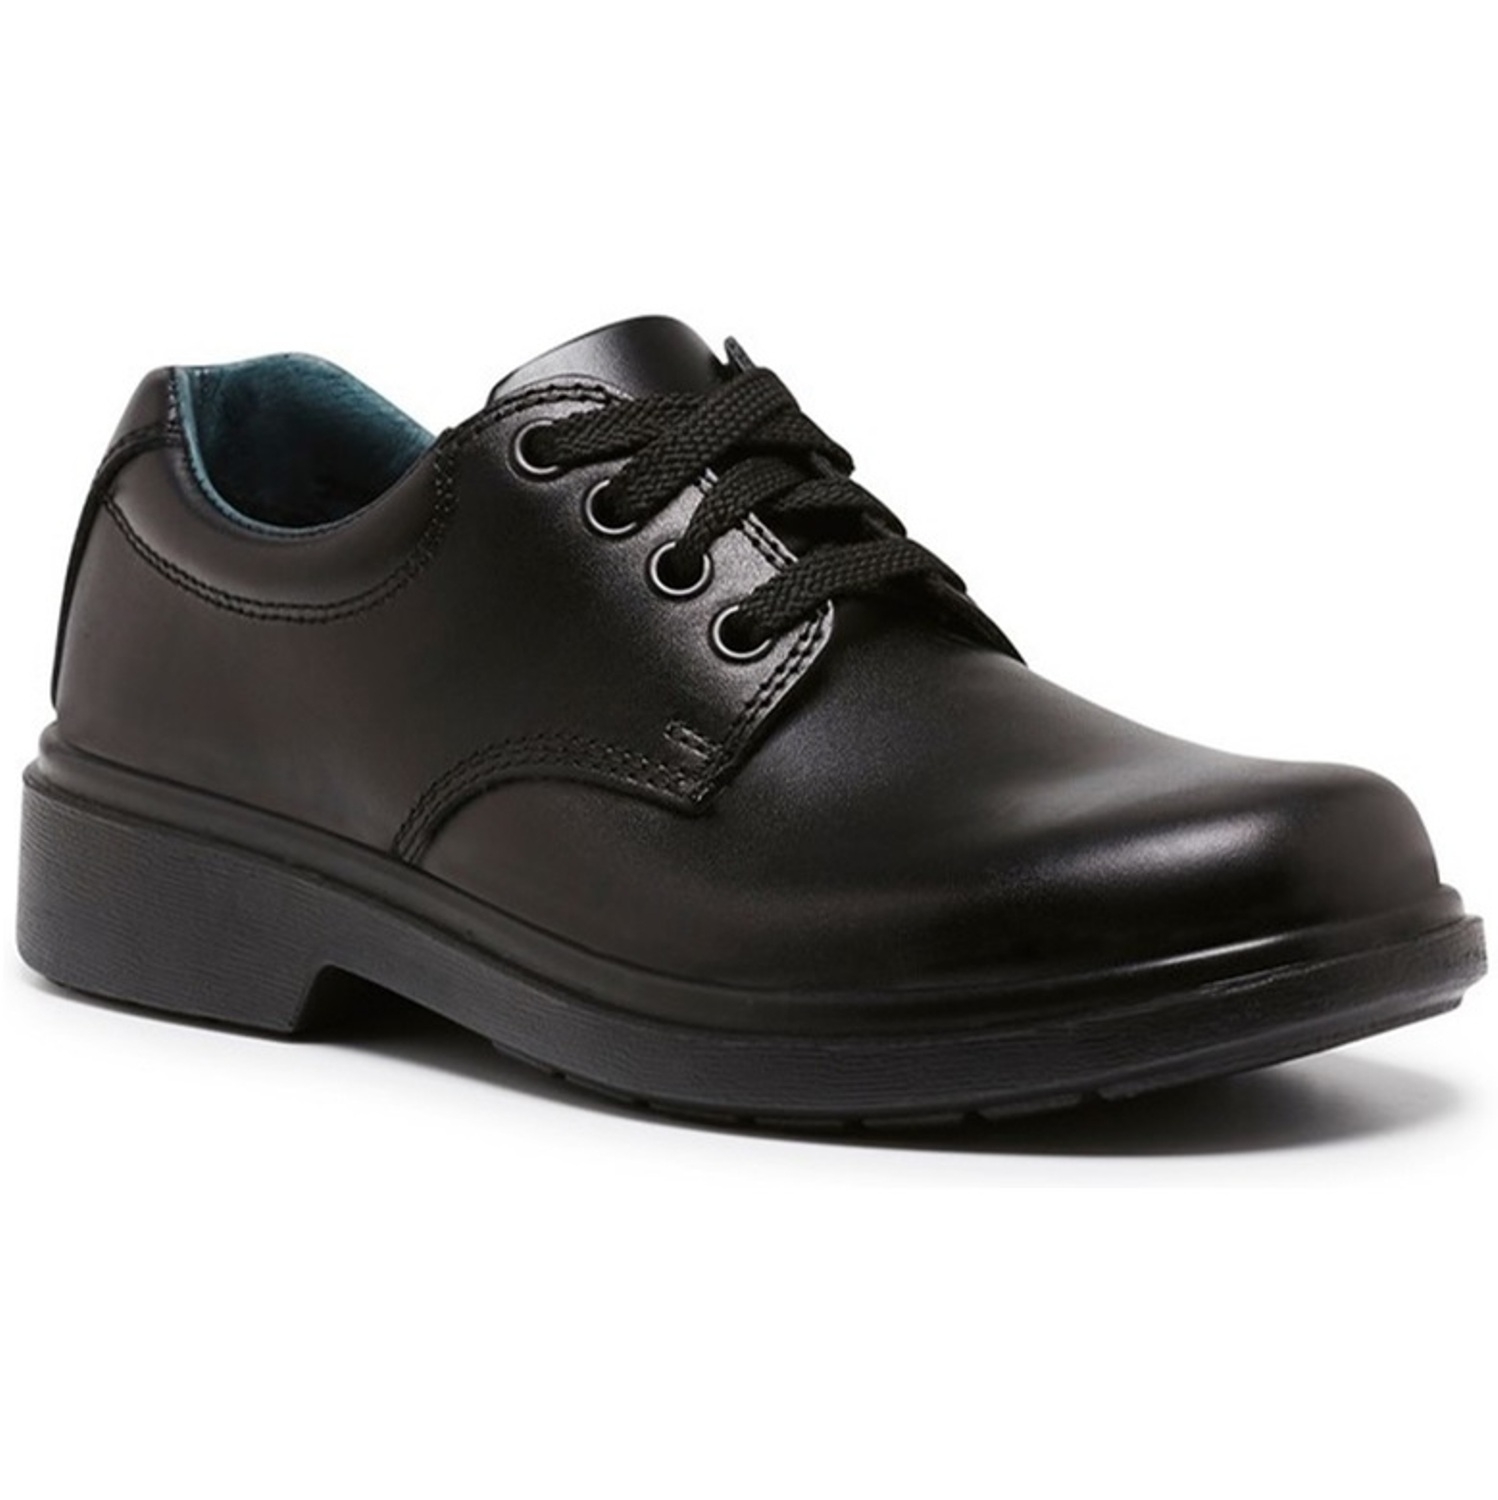 clarks leather school shoes